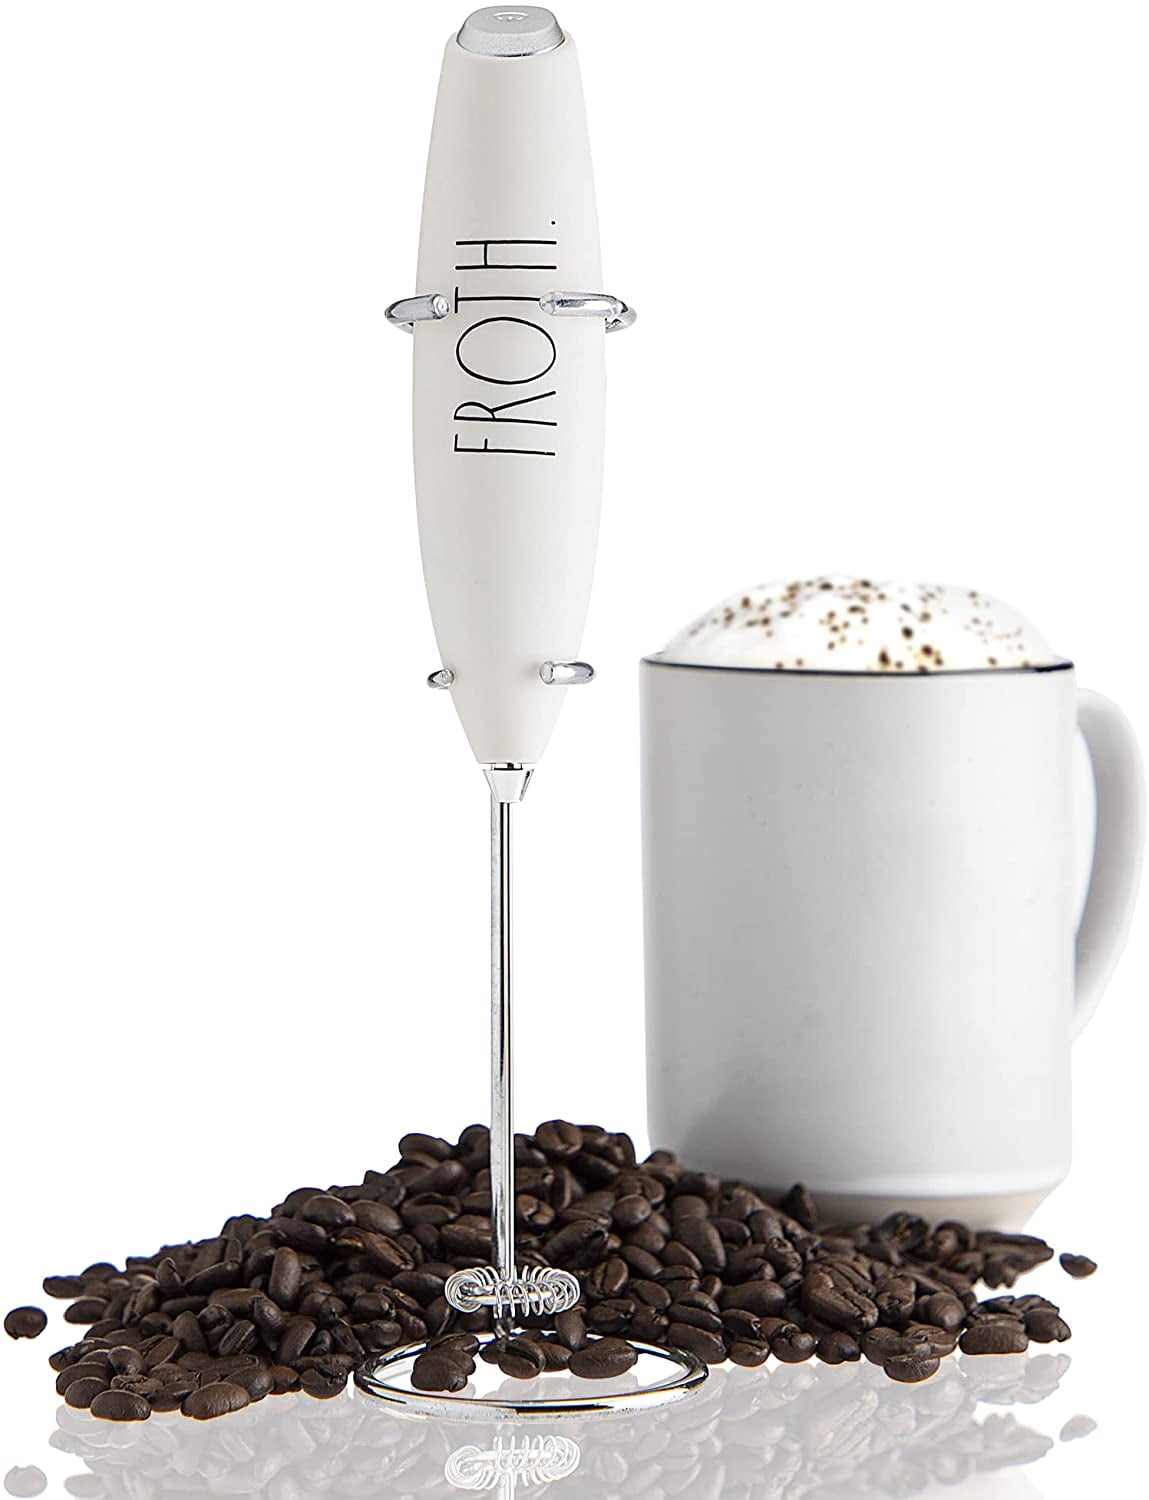 Rae Dunn Handheld Electric Milk Frother with Stand, White 